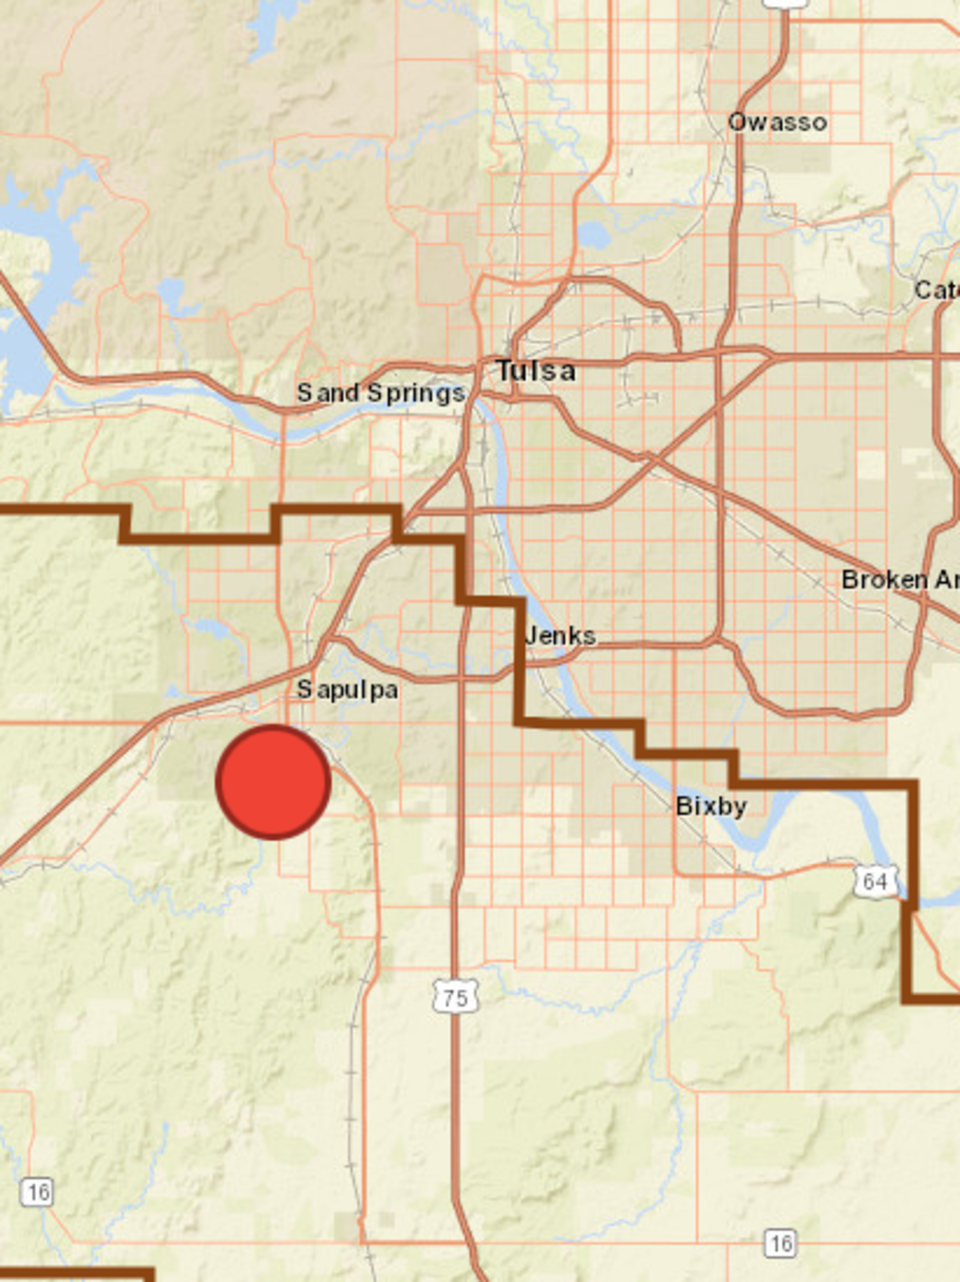 Og E Power Restored To Bristow Sapulpa Areas After Outages Ktul